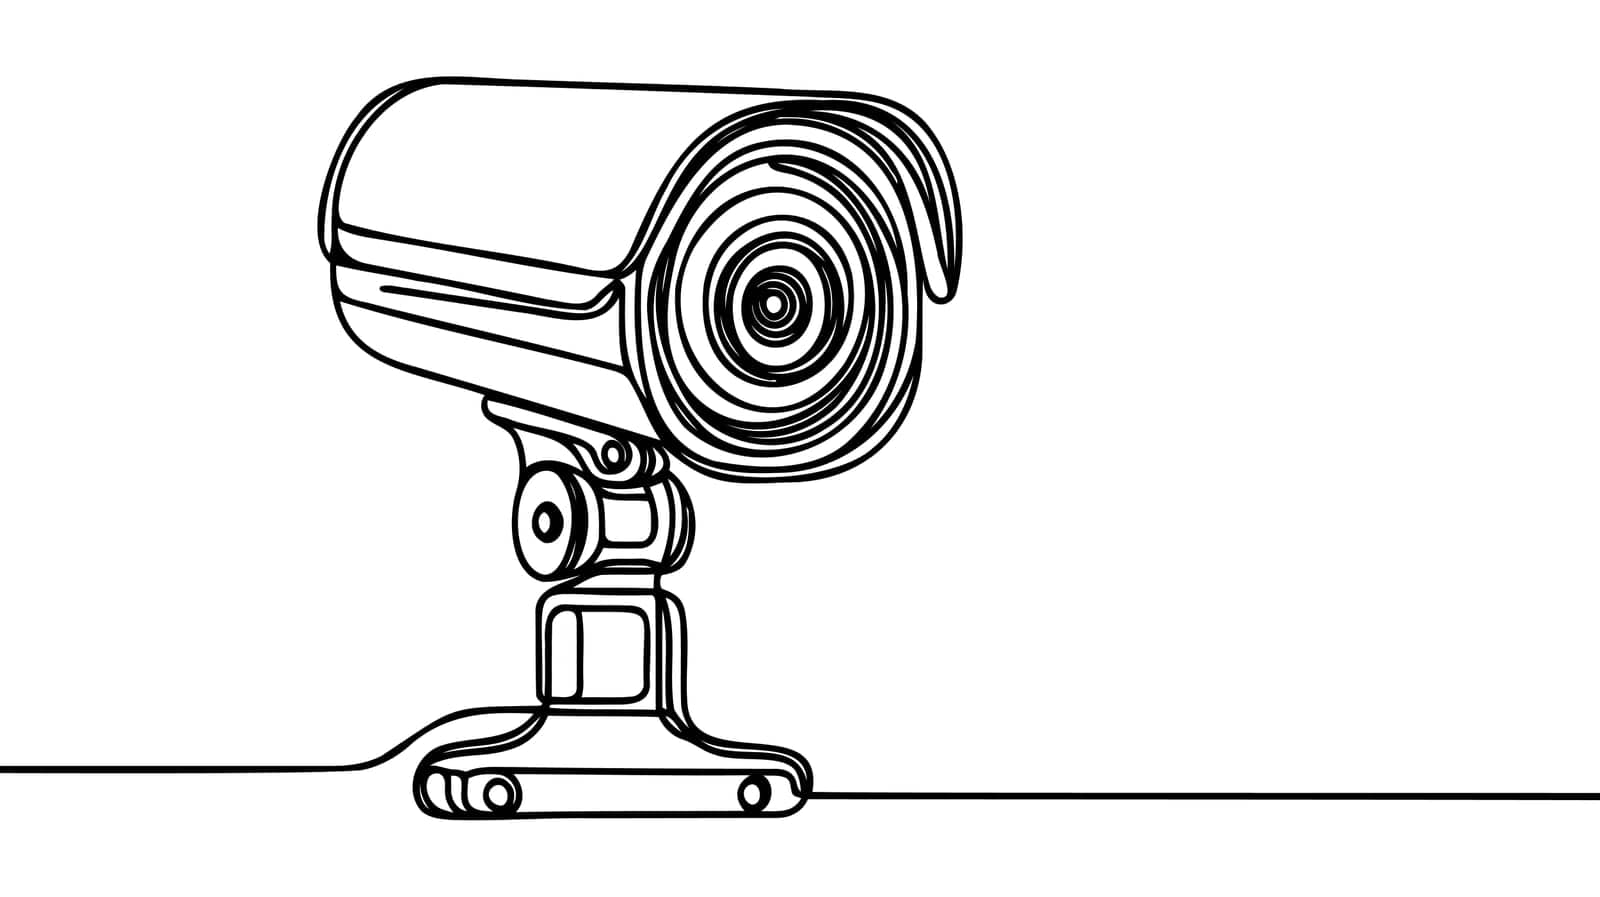 Continuous one line drawing of outdoor surveillance camera vector design. by Artisttop